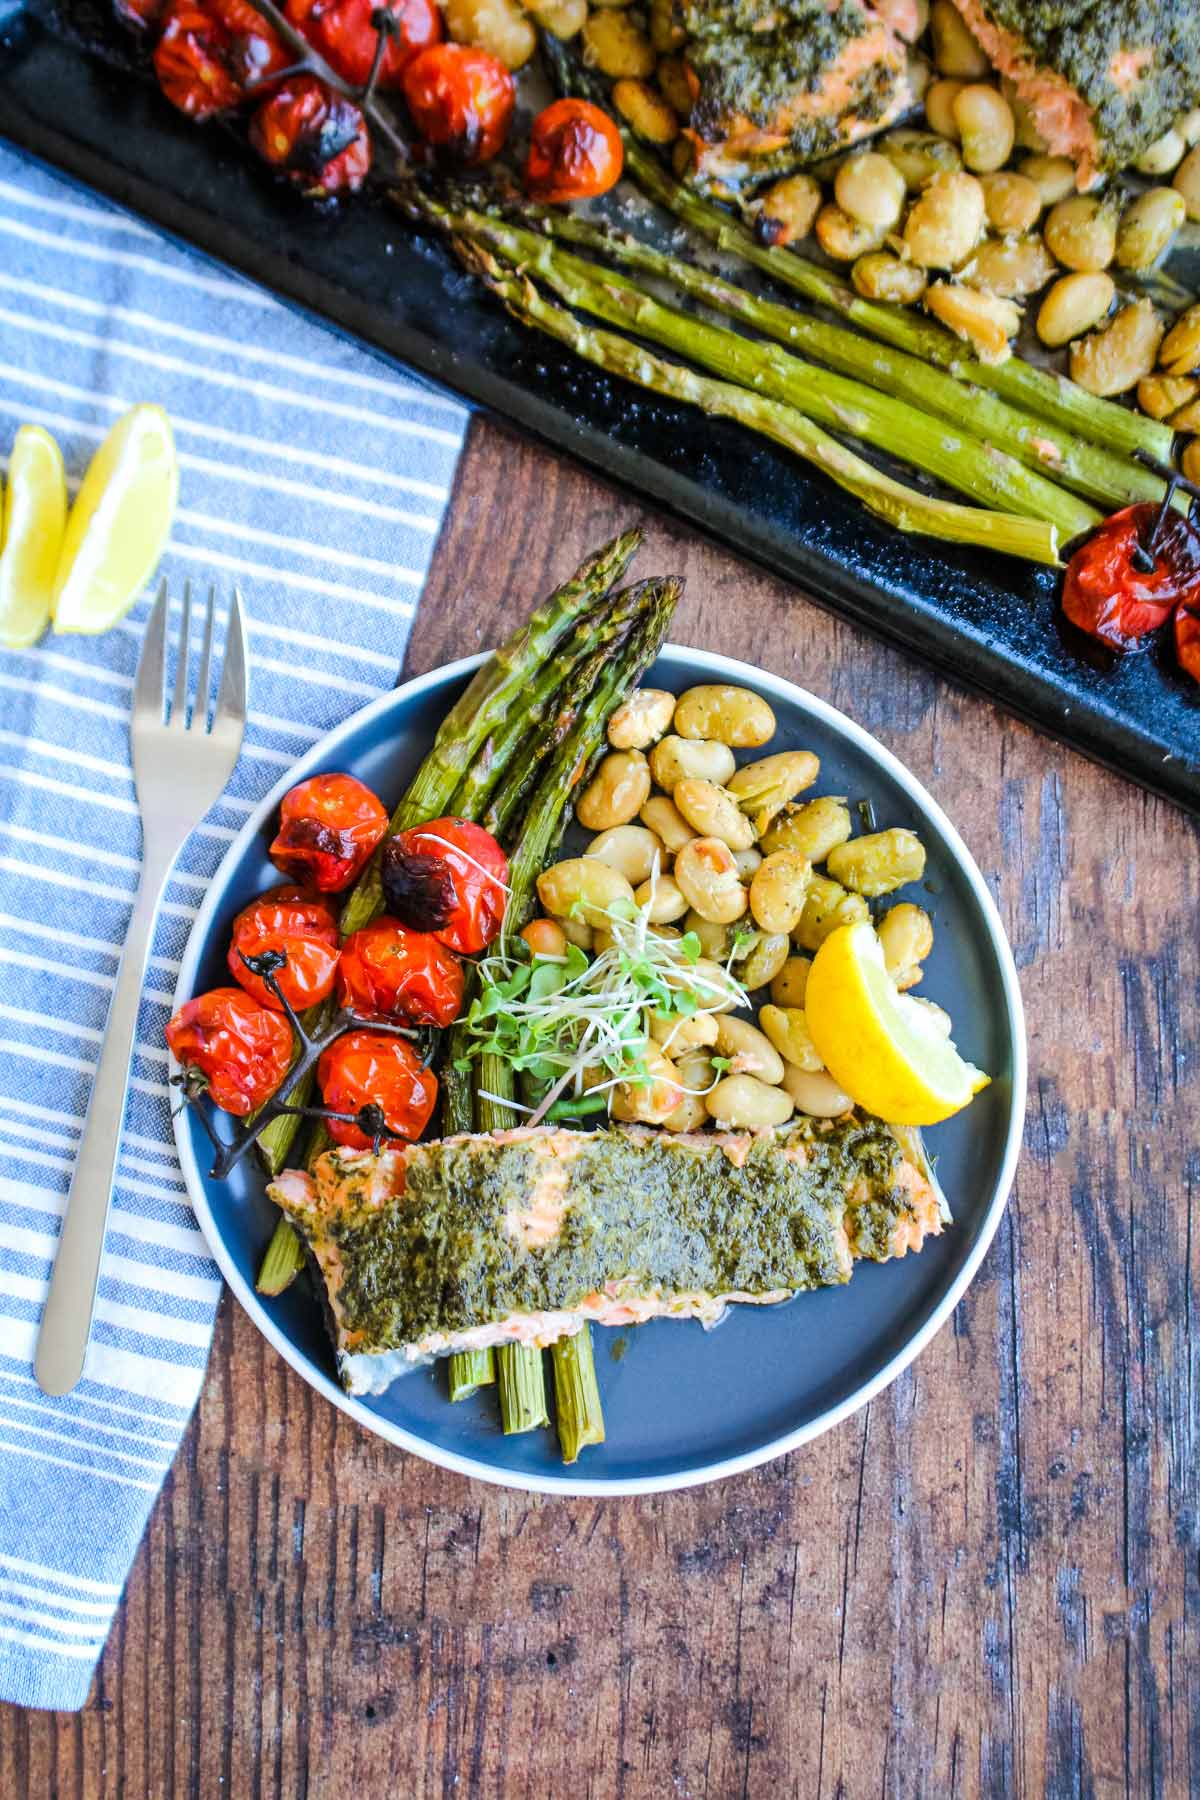 Pesto salmon served on a blue plate with veggies on the side and more on the sheet pan in the background.